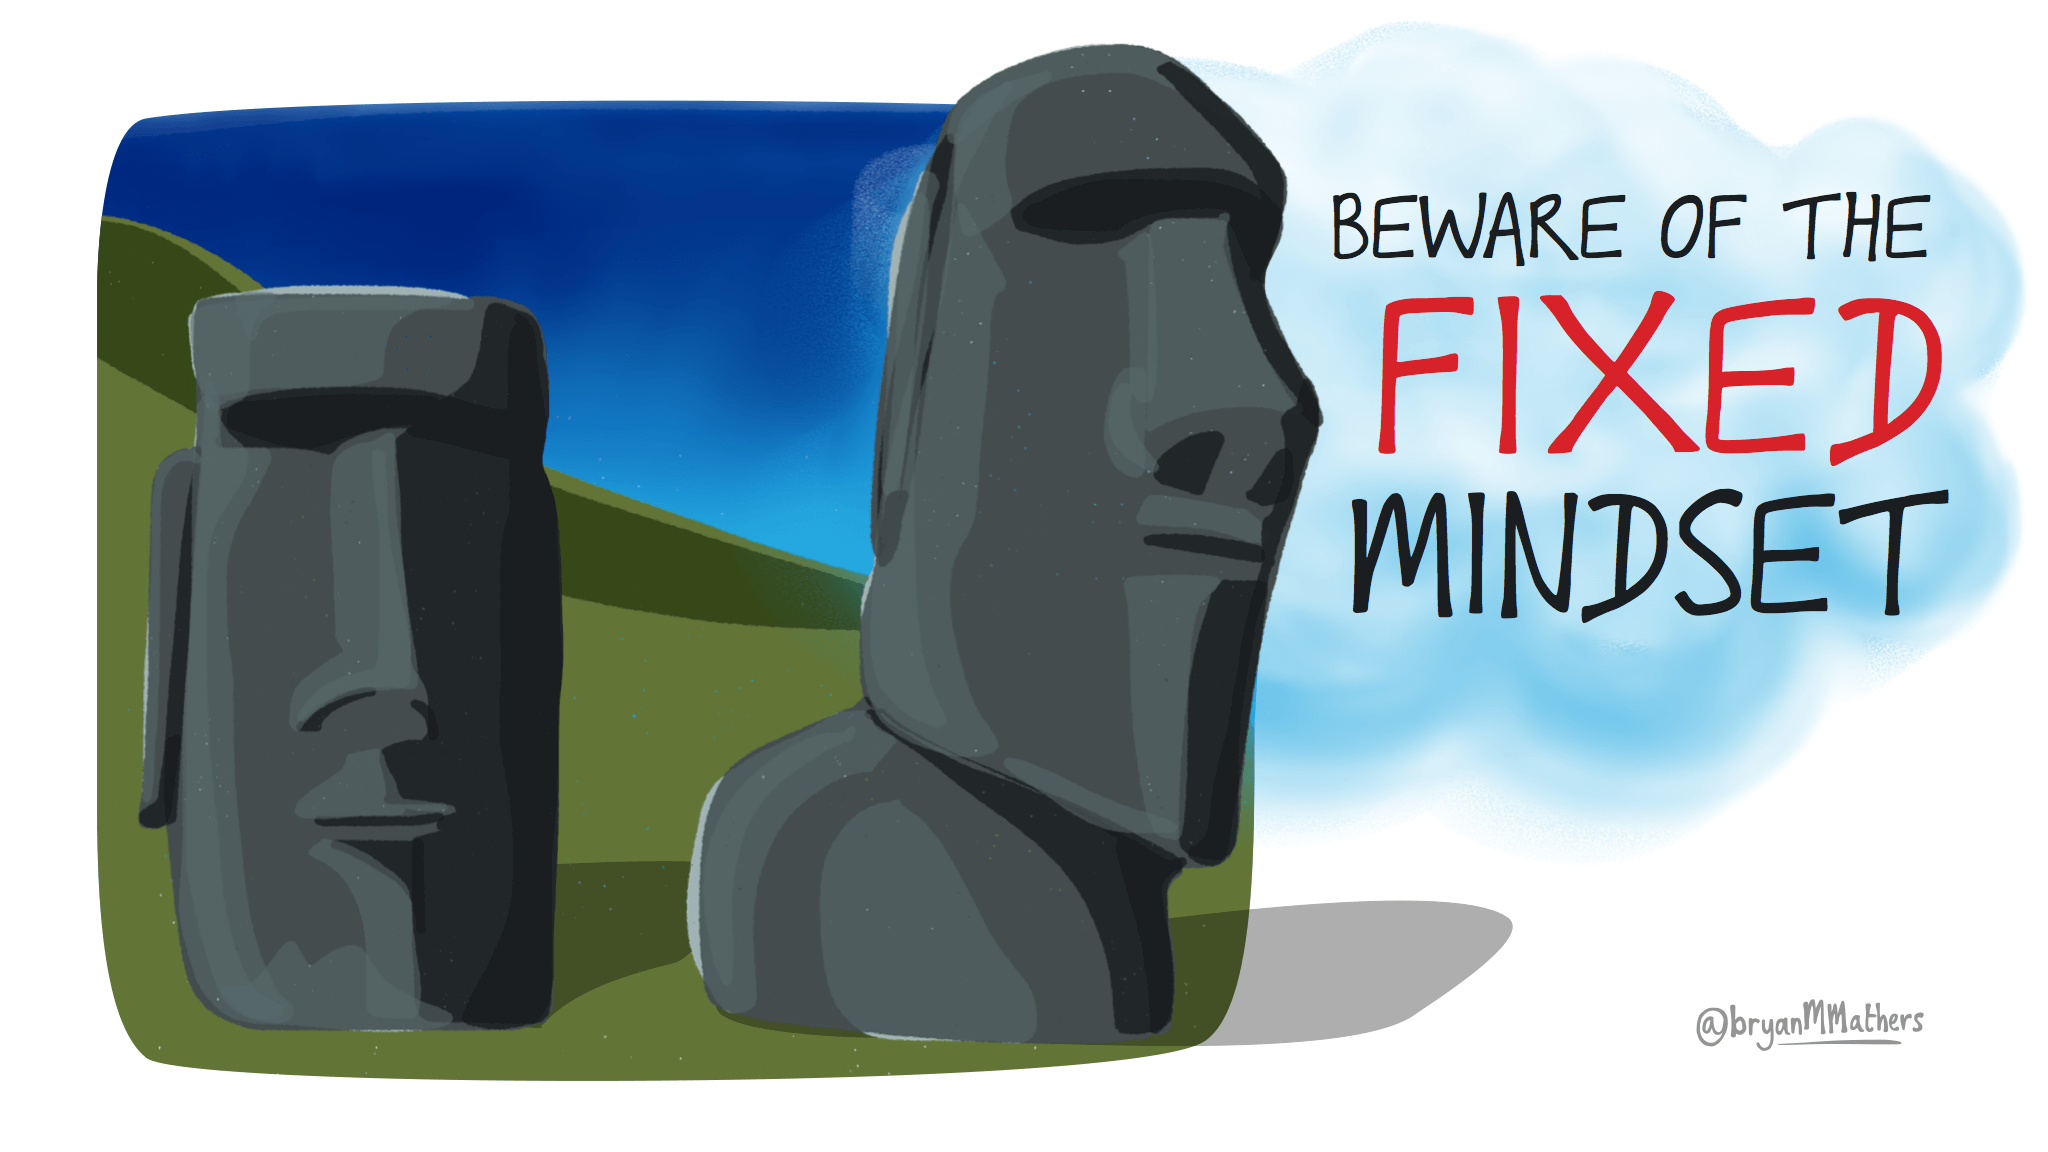 A fixed mindset is monolithic like the Easter island statues (moʻai). If you’re not already, you should be wary of a fixed mindset. Fixed mindsets by Visual Thinkery is licensed under CC-BY-ND